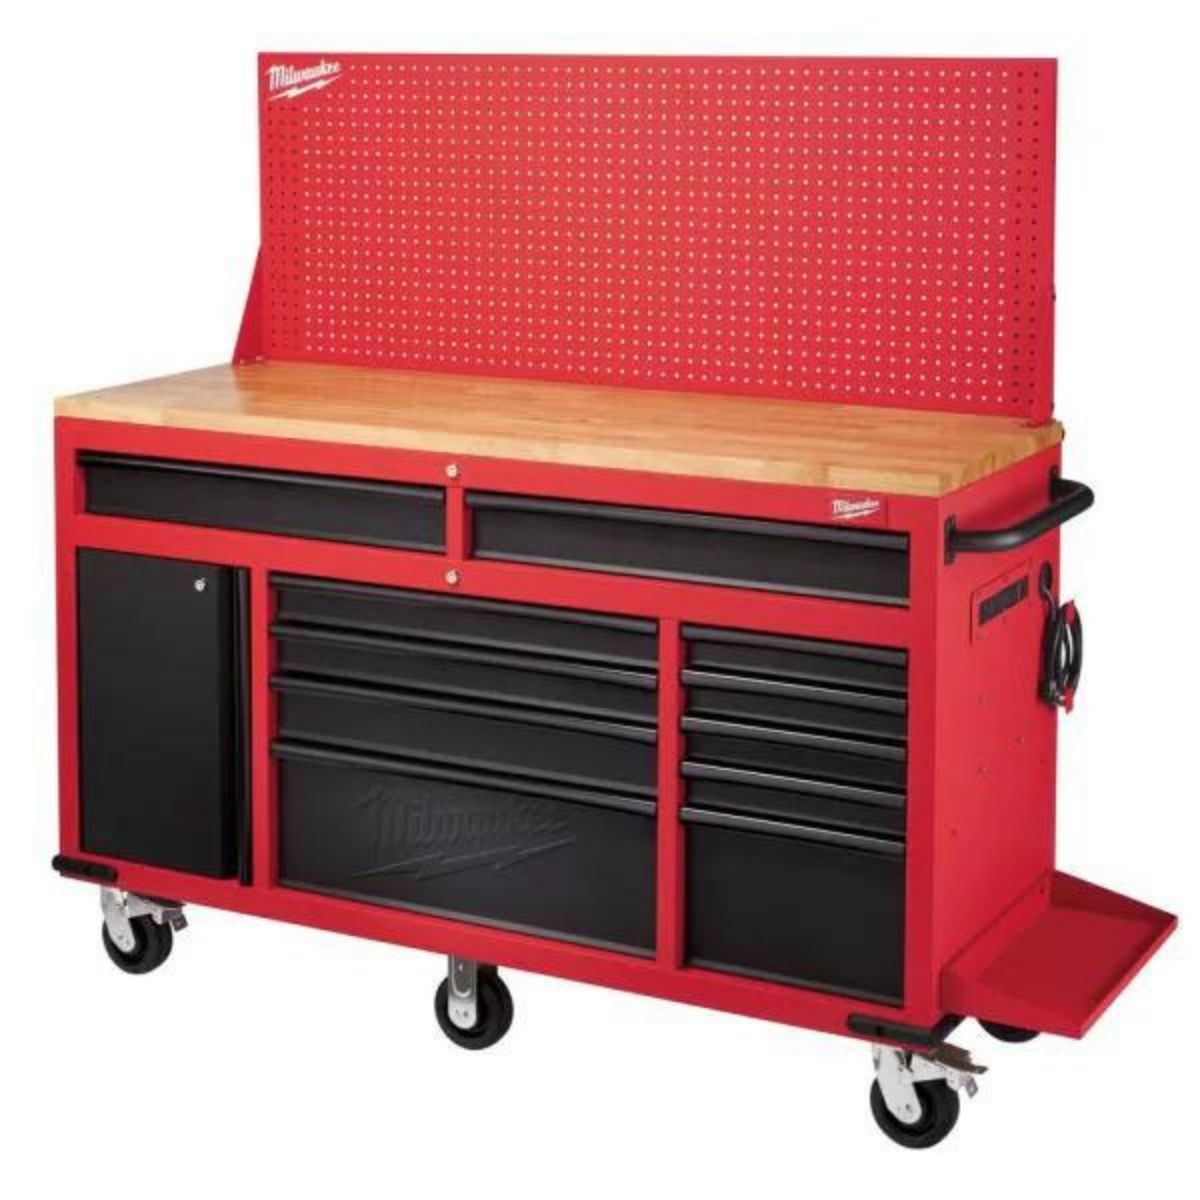 The Best Home Depot Black Friday Option: Milwaukee 11-Drawer Mobile Workbench